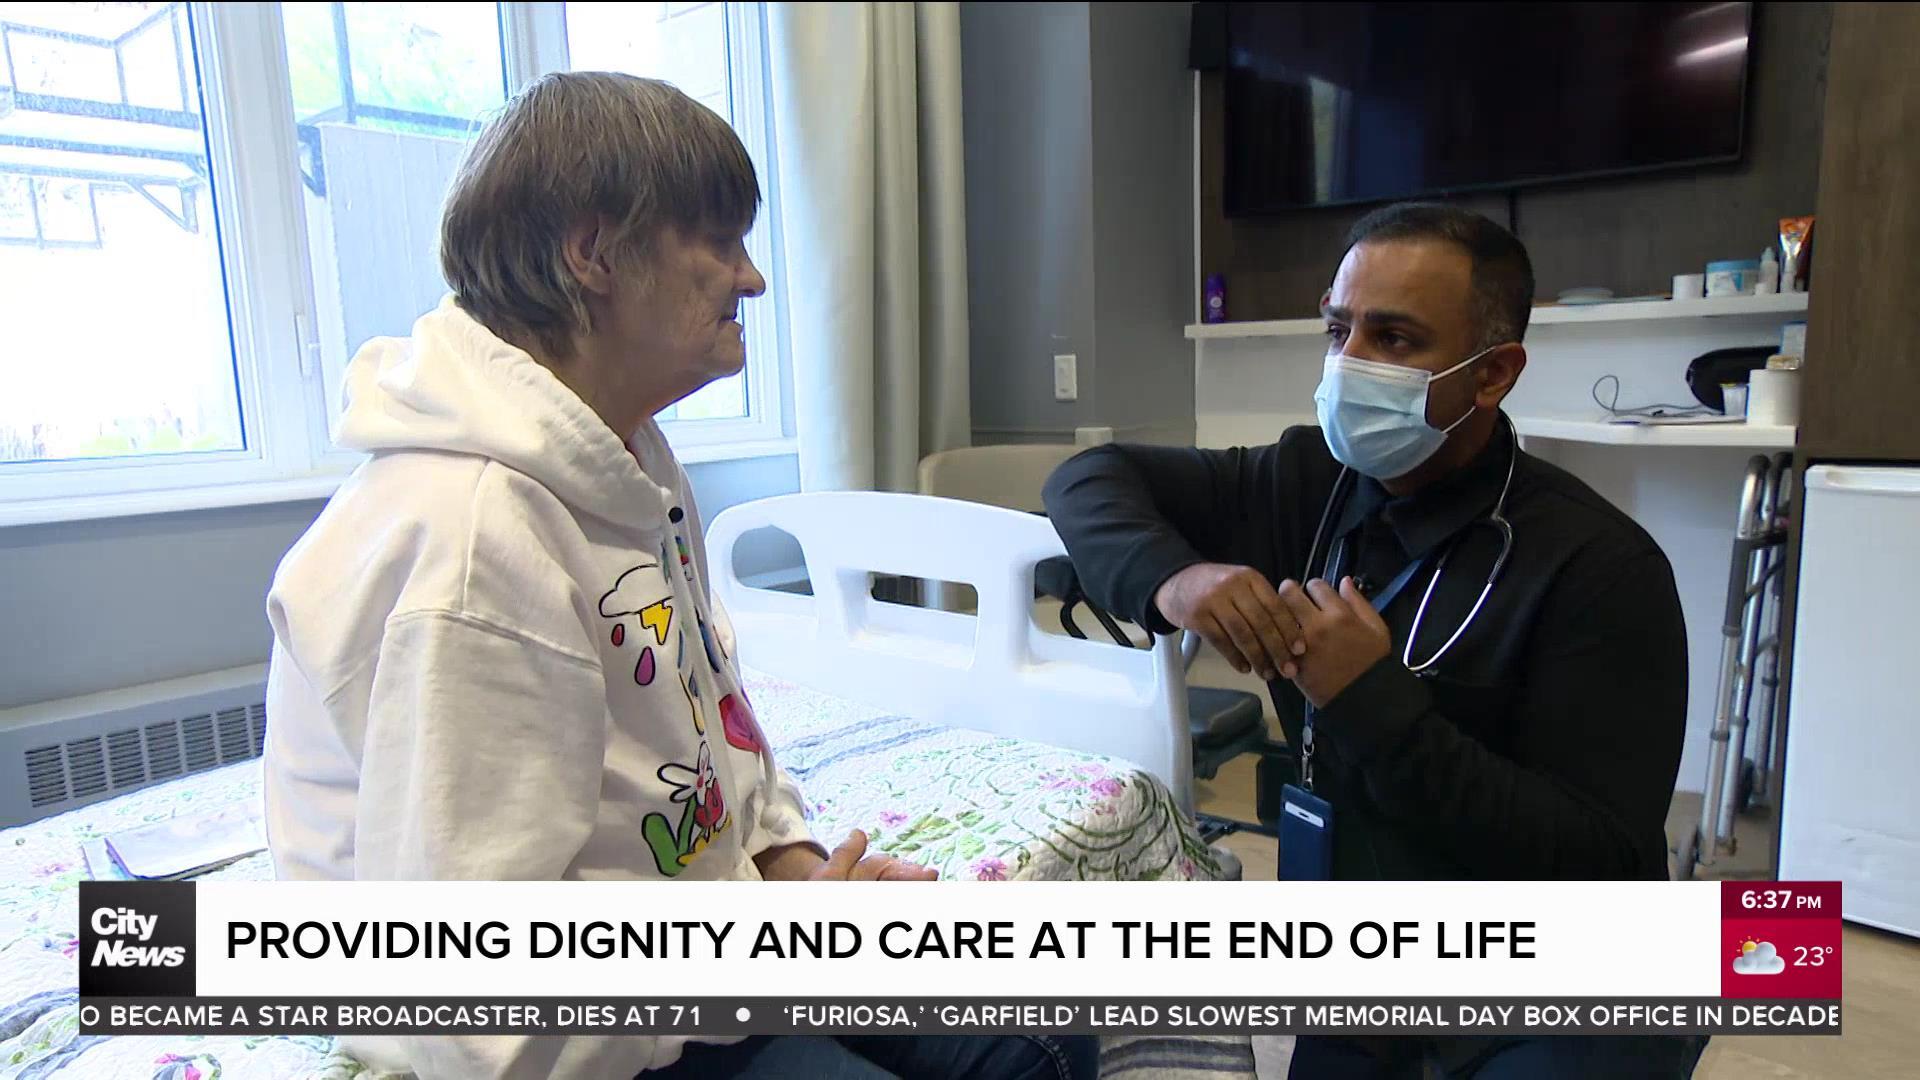 Providing dignity and care at the end of life